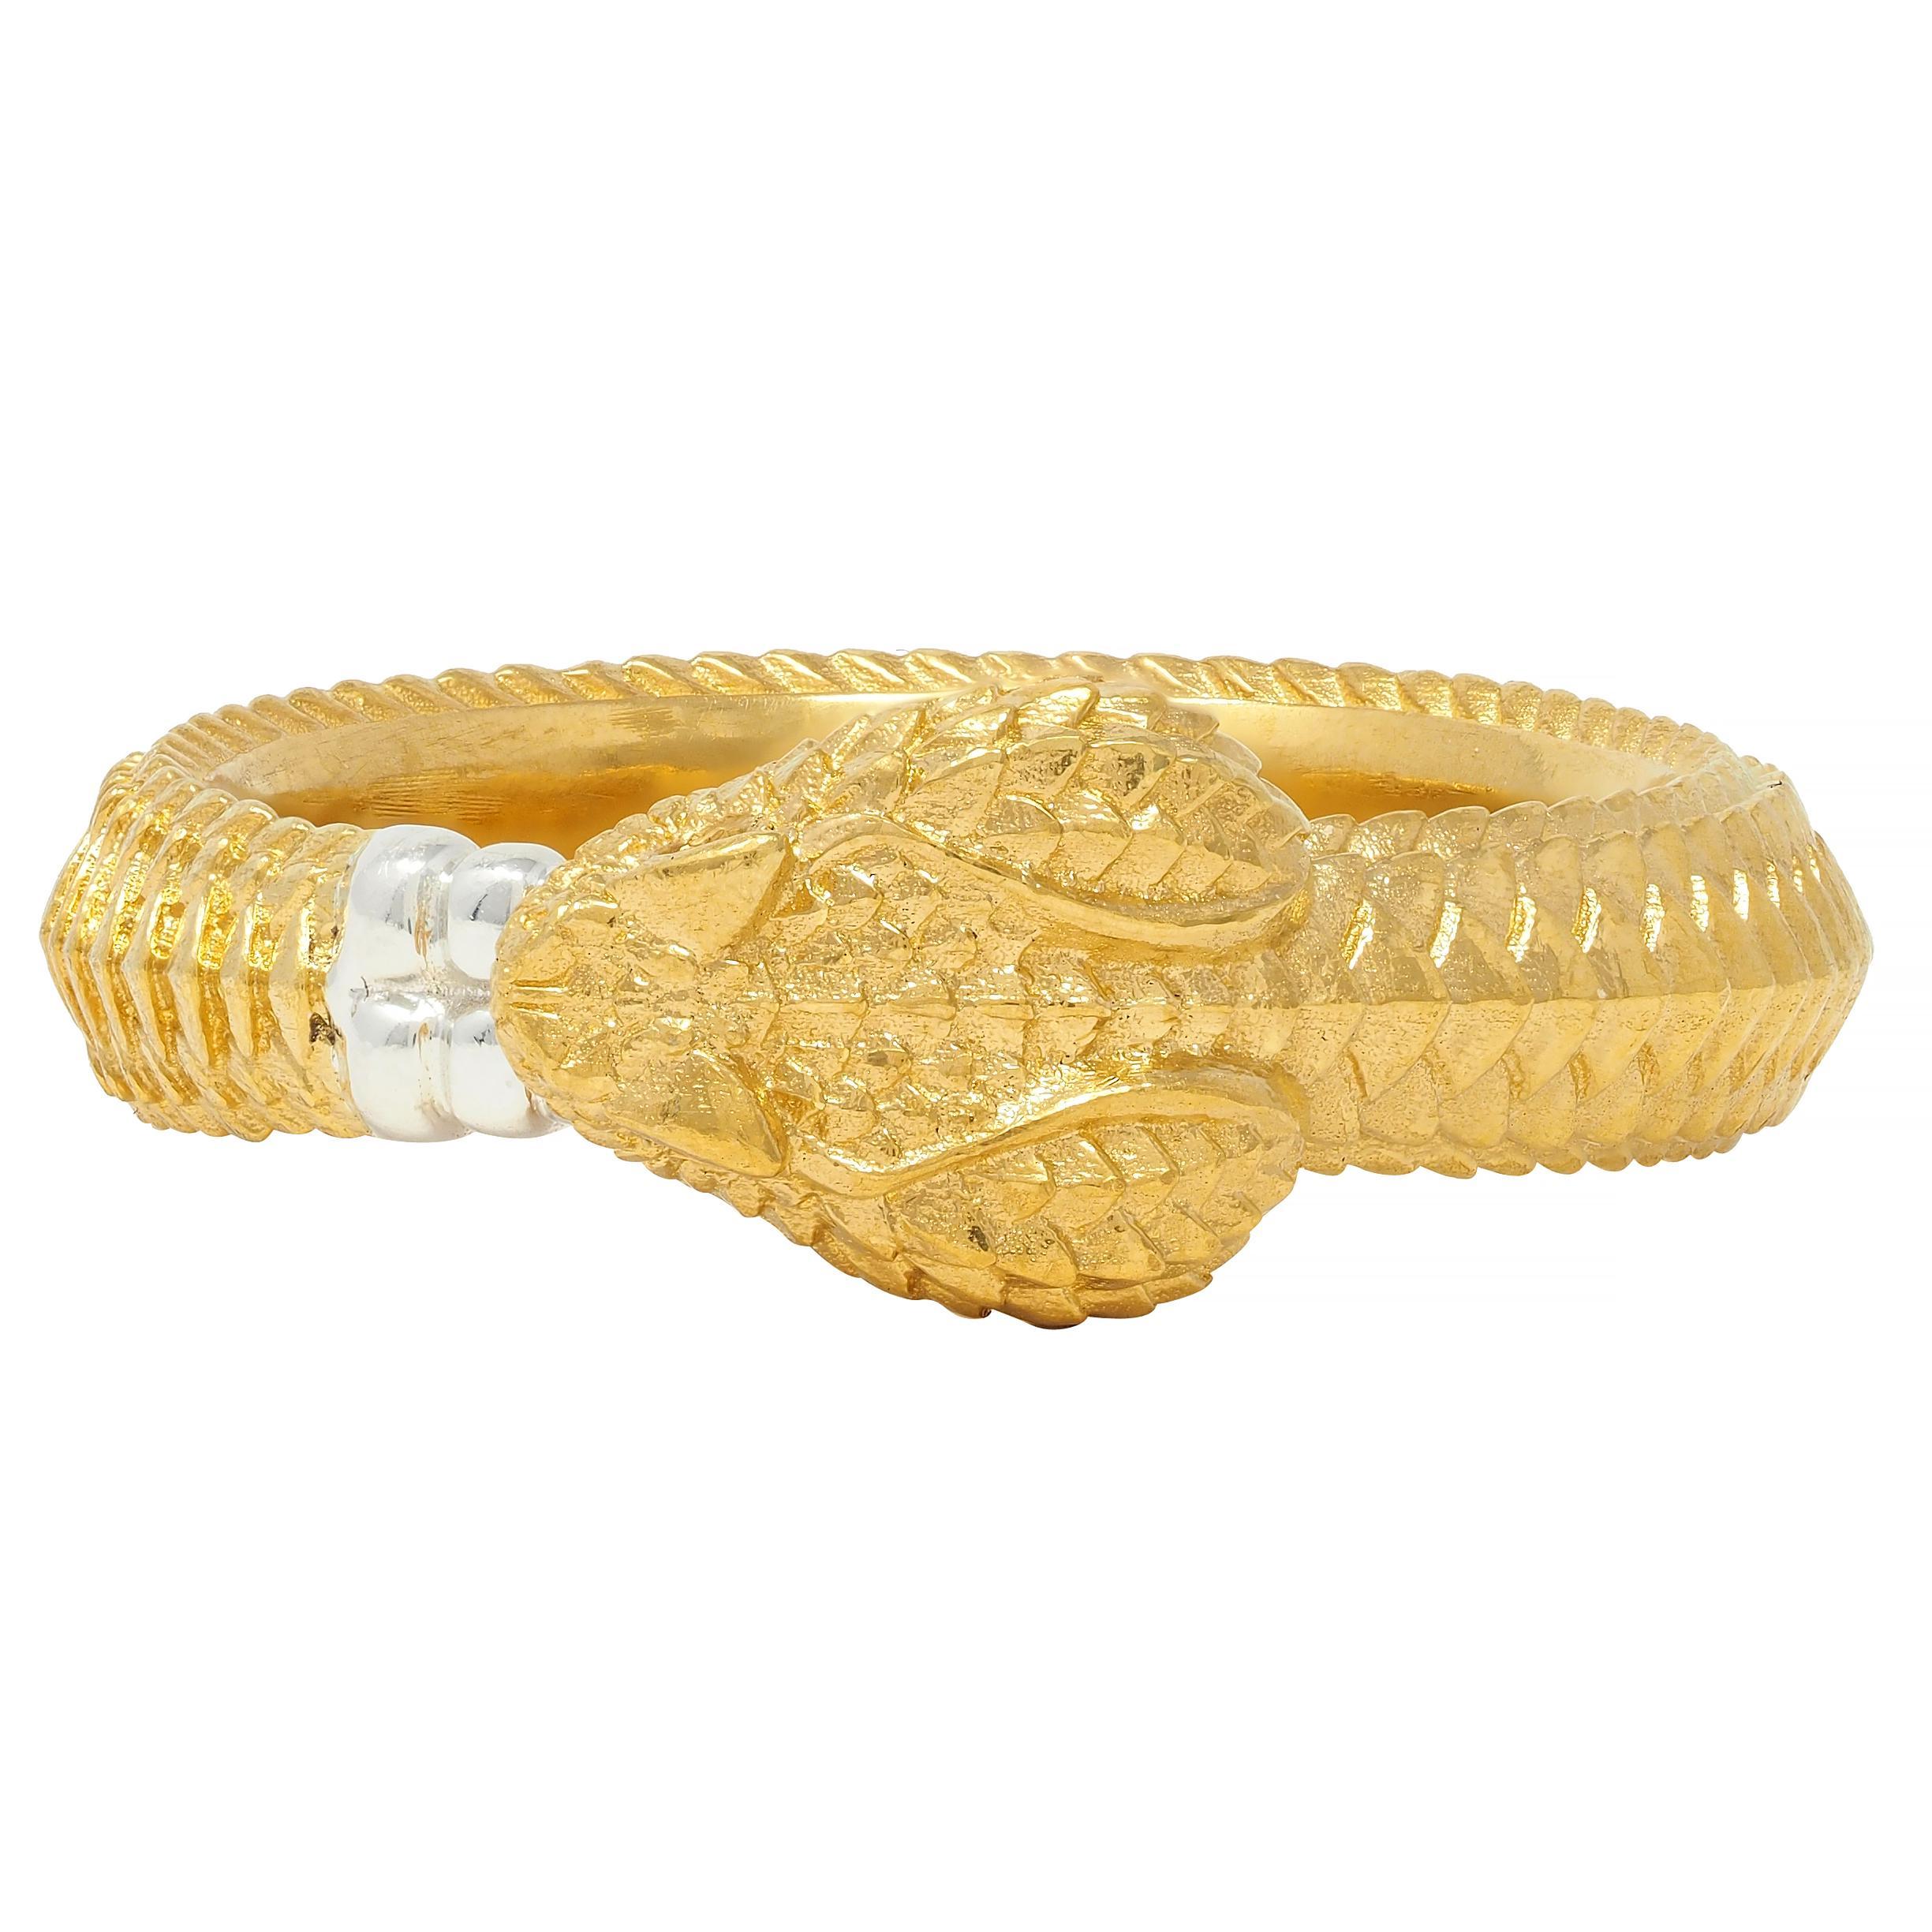 Designed as a highly rendered rattlesnake with grooved scales
Depicting an ouroboros motif with tail in mouth 
Accented by round brilliant cut diamond eyes - eye clean and bright
Rattle tip of tail is sterling silver
Stamped for 24 karat gold and